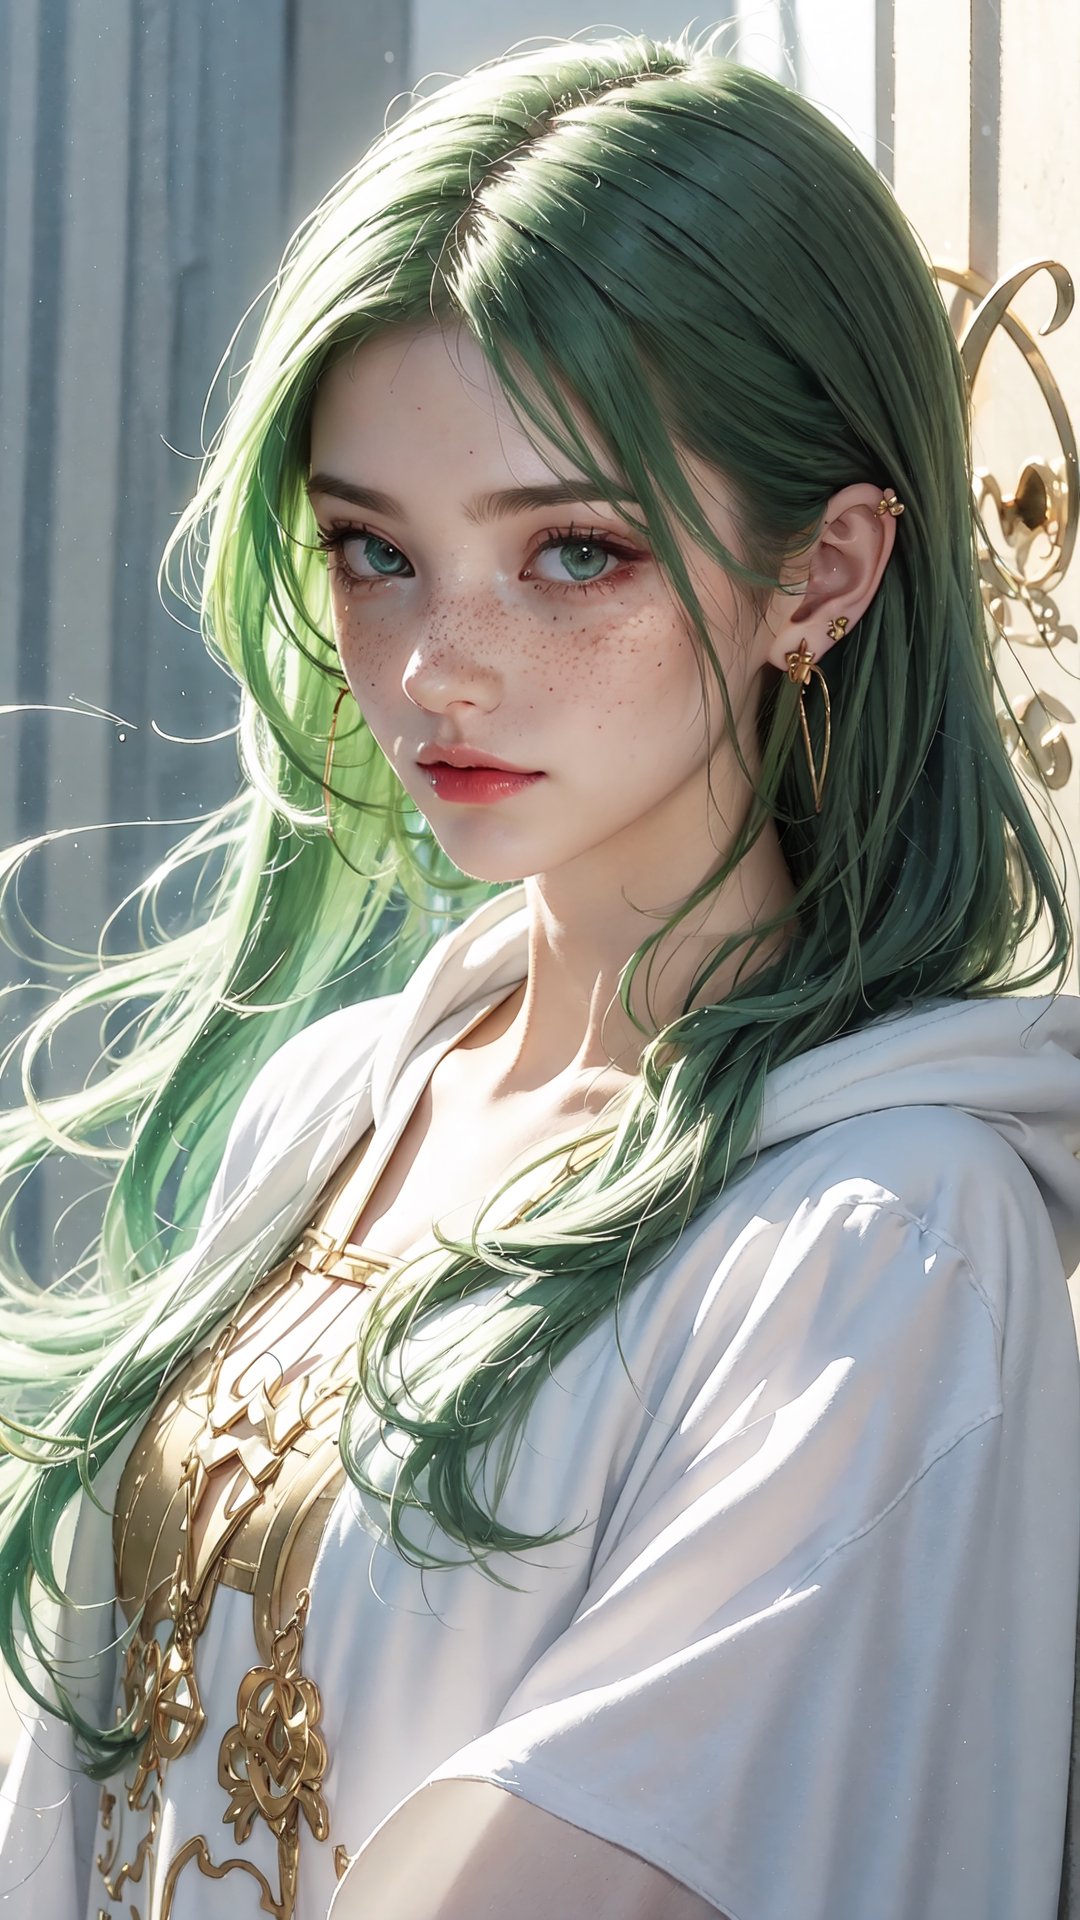 1 girl, arcane style, watercolor style:1.5,watercolor,  long hair, freckles, green hair, golden big earings, feathers, hoddie, 